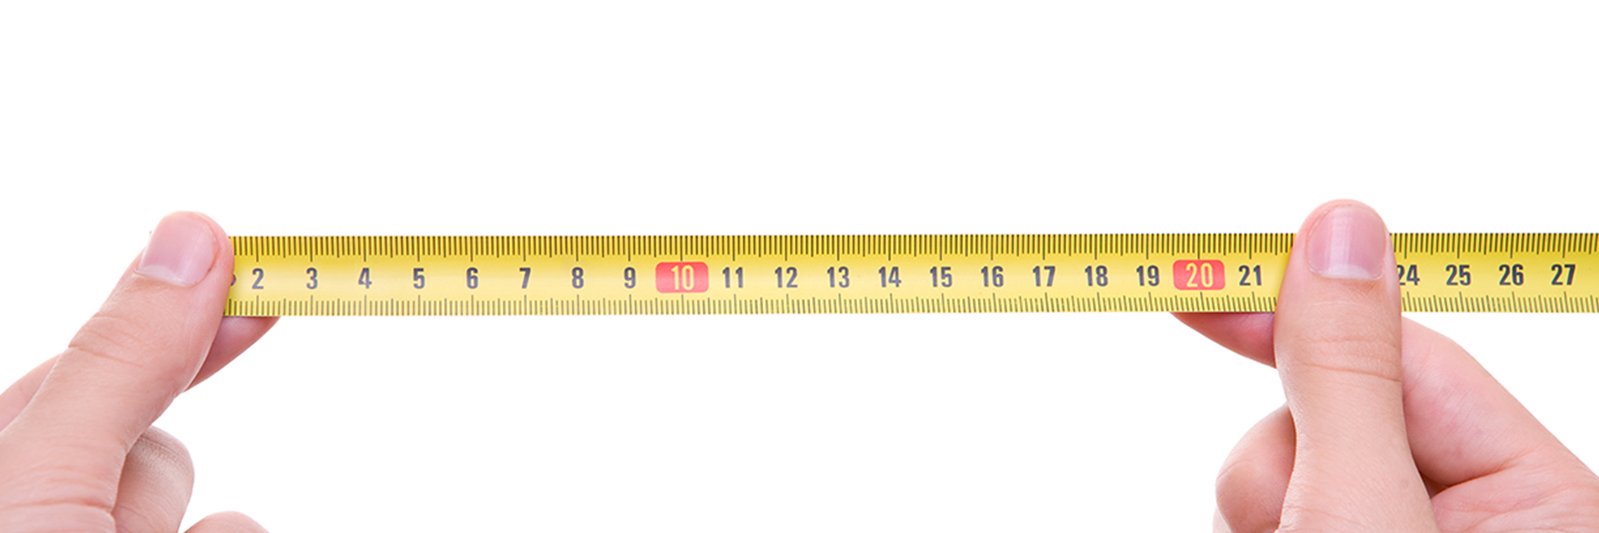 How to Measure Wrist Size for Bracelets or Watches | JewelryJealousy